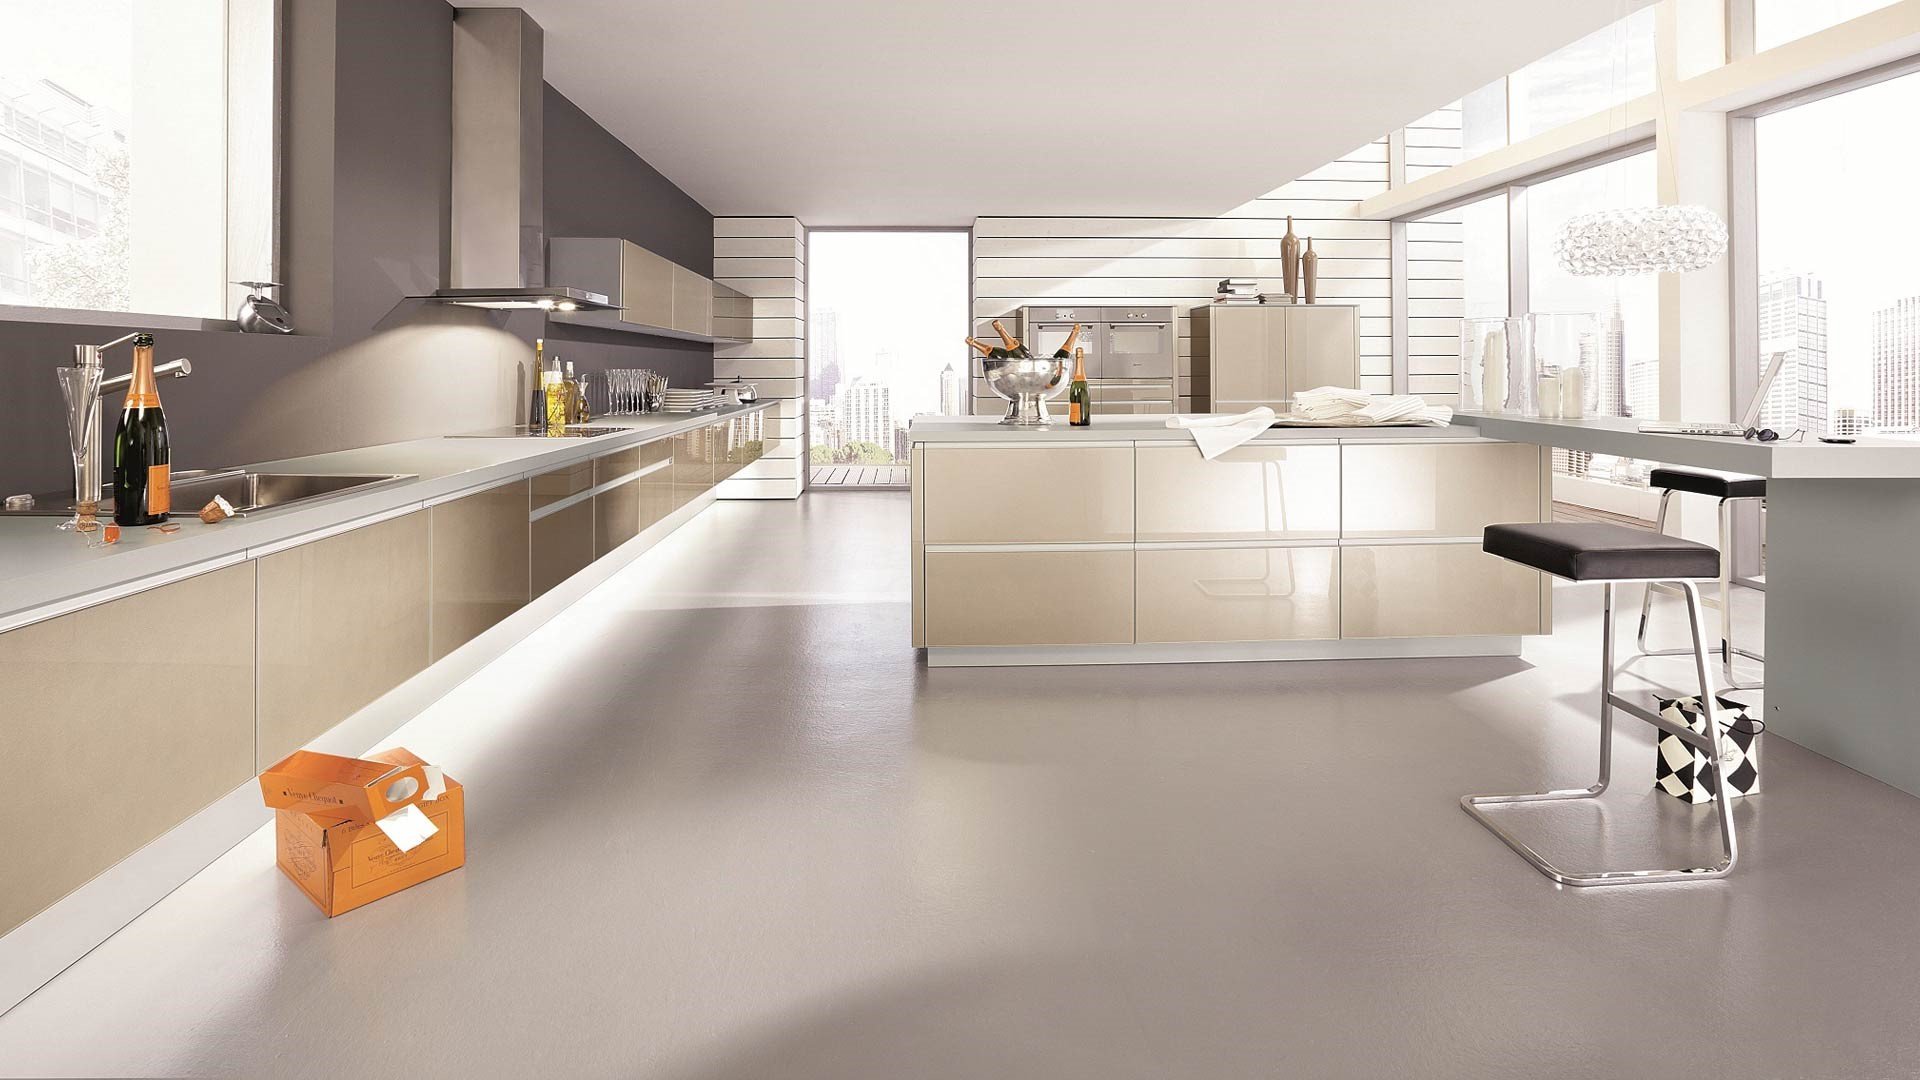 Gloss or matt: which kitchen style is right for you?